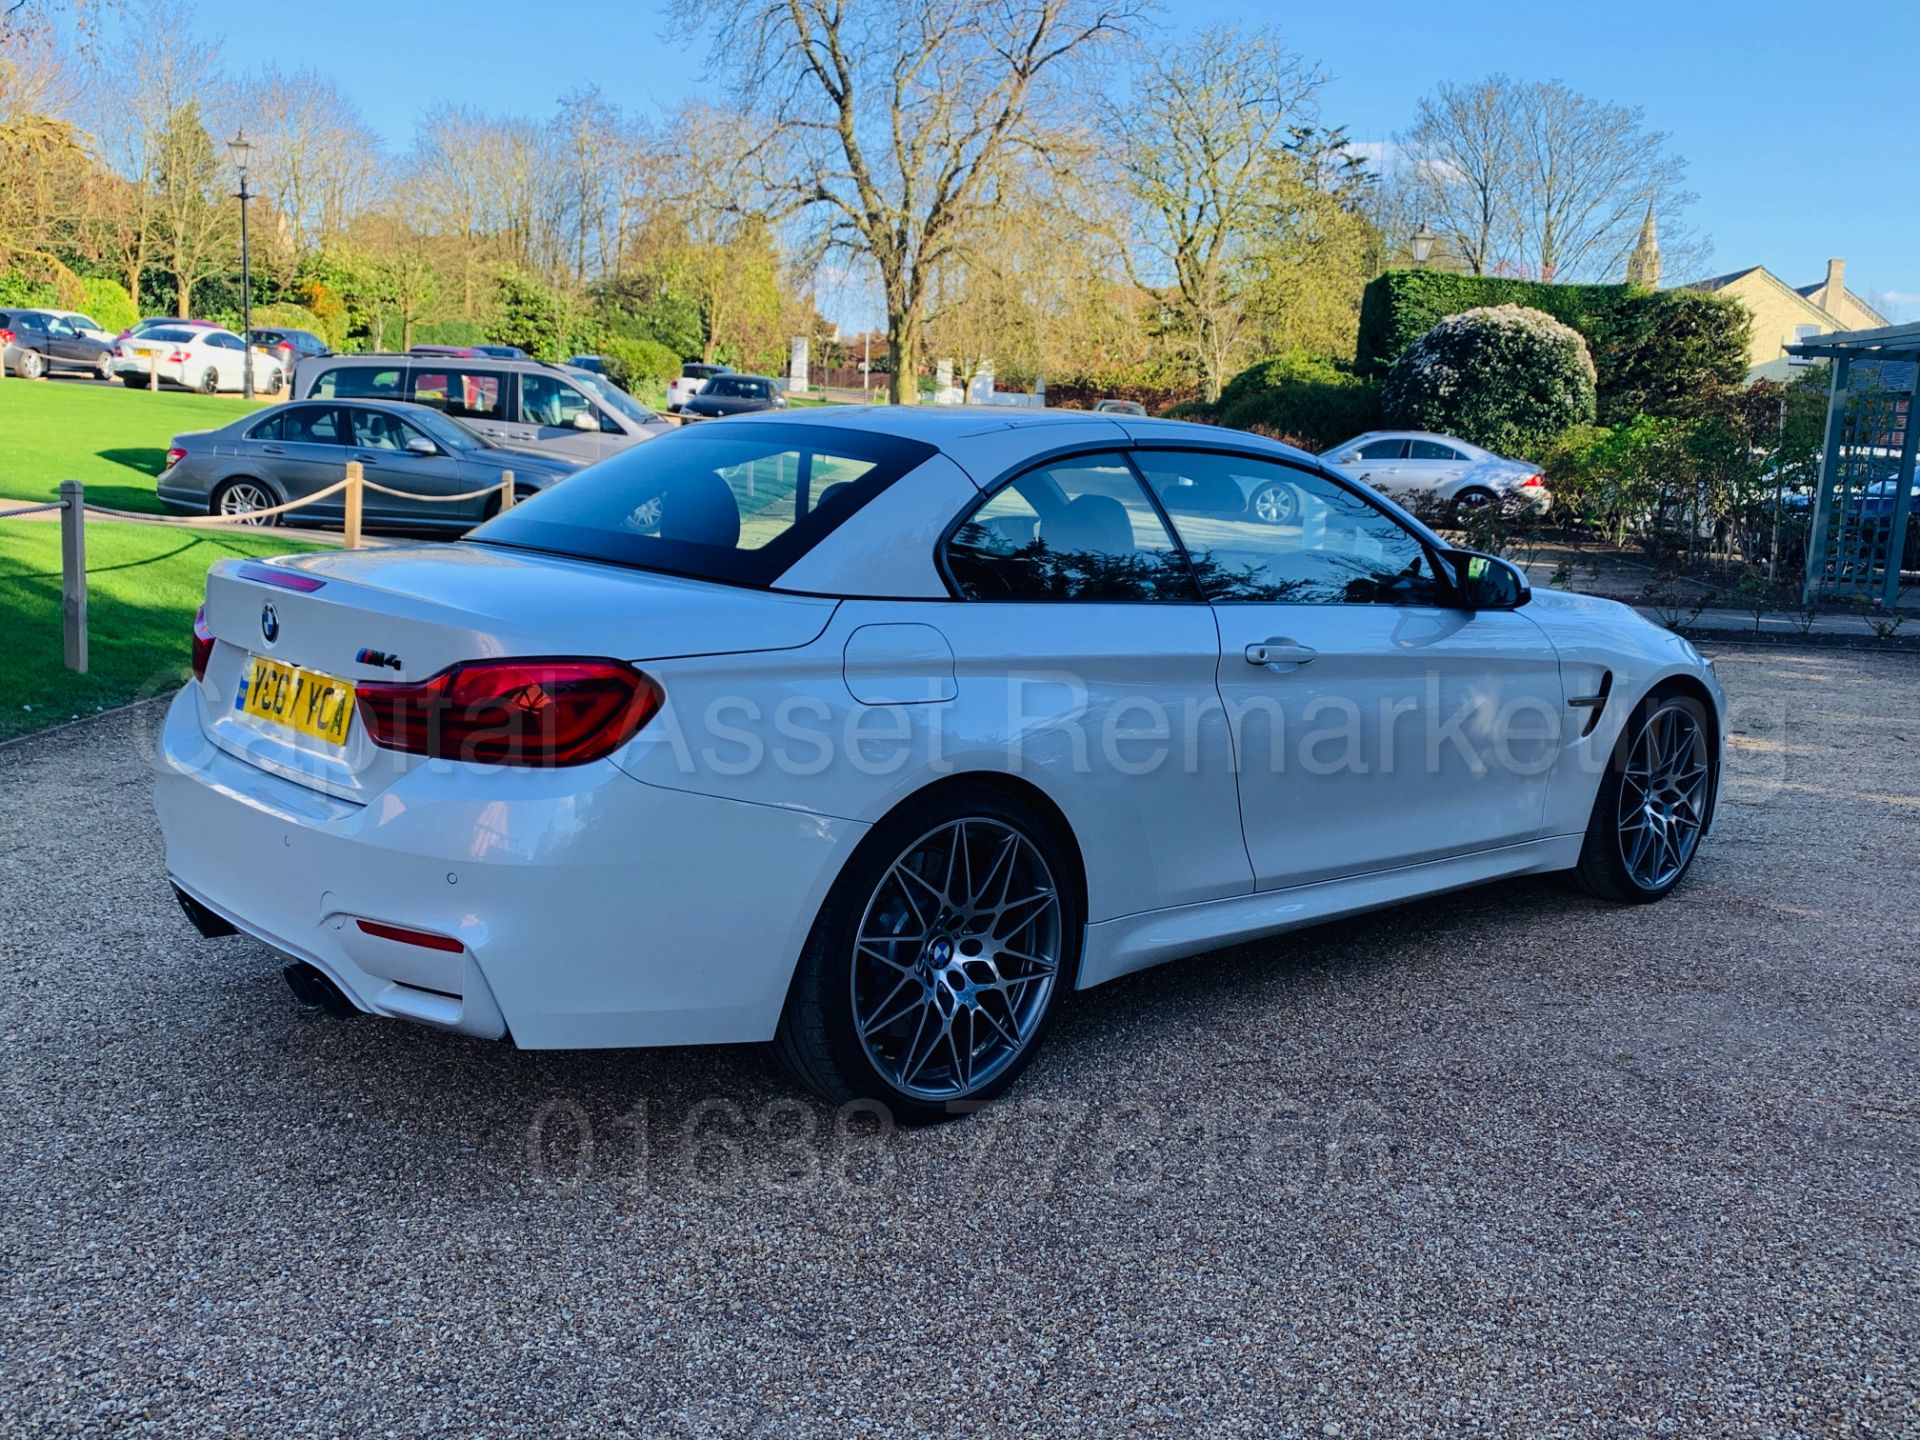 ON SALE BMW M4 CONVERTIBLE *COMPETITION PACKAGE* (2018 MODEL) '431 BHP - M DCT AUTO' WOW!!!!! - Image 16 of 89